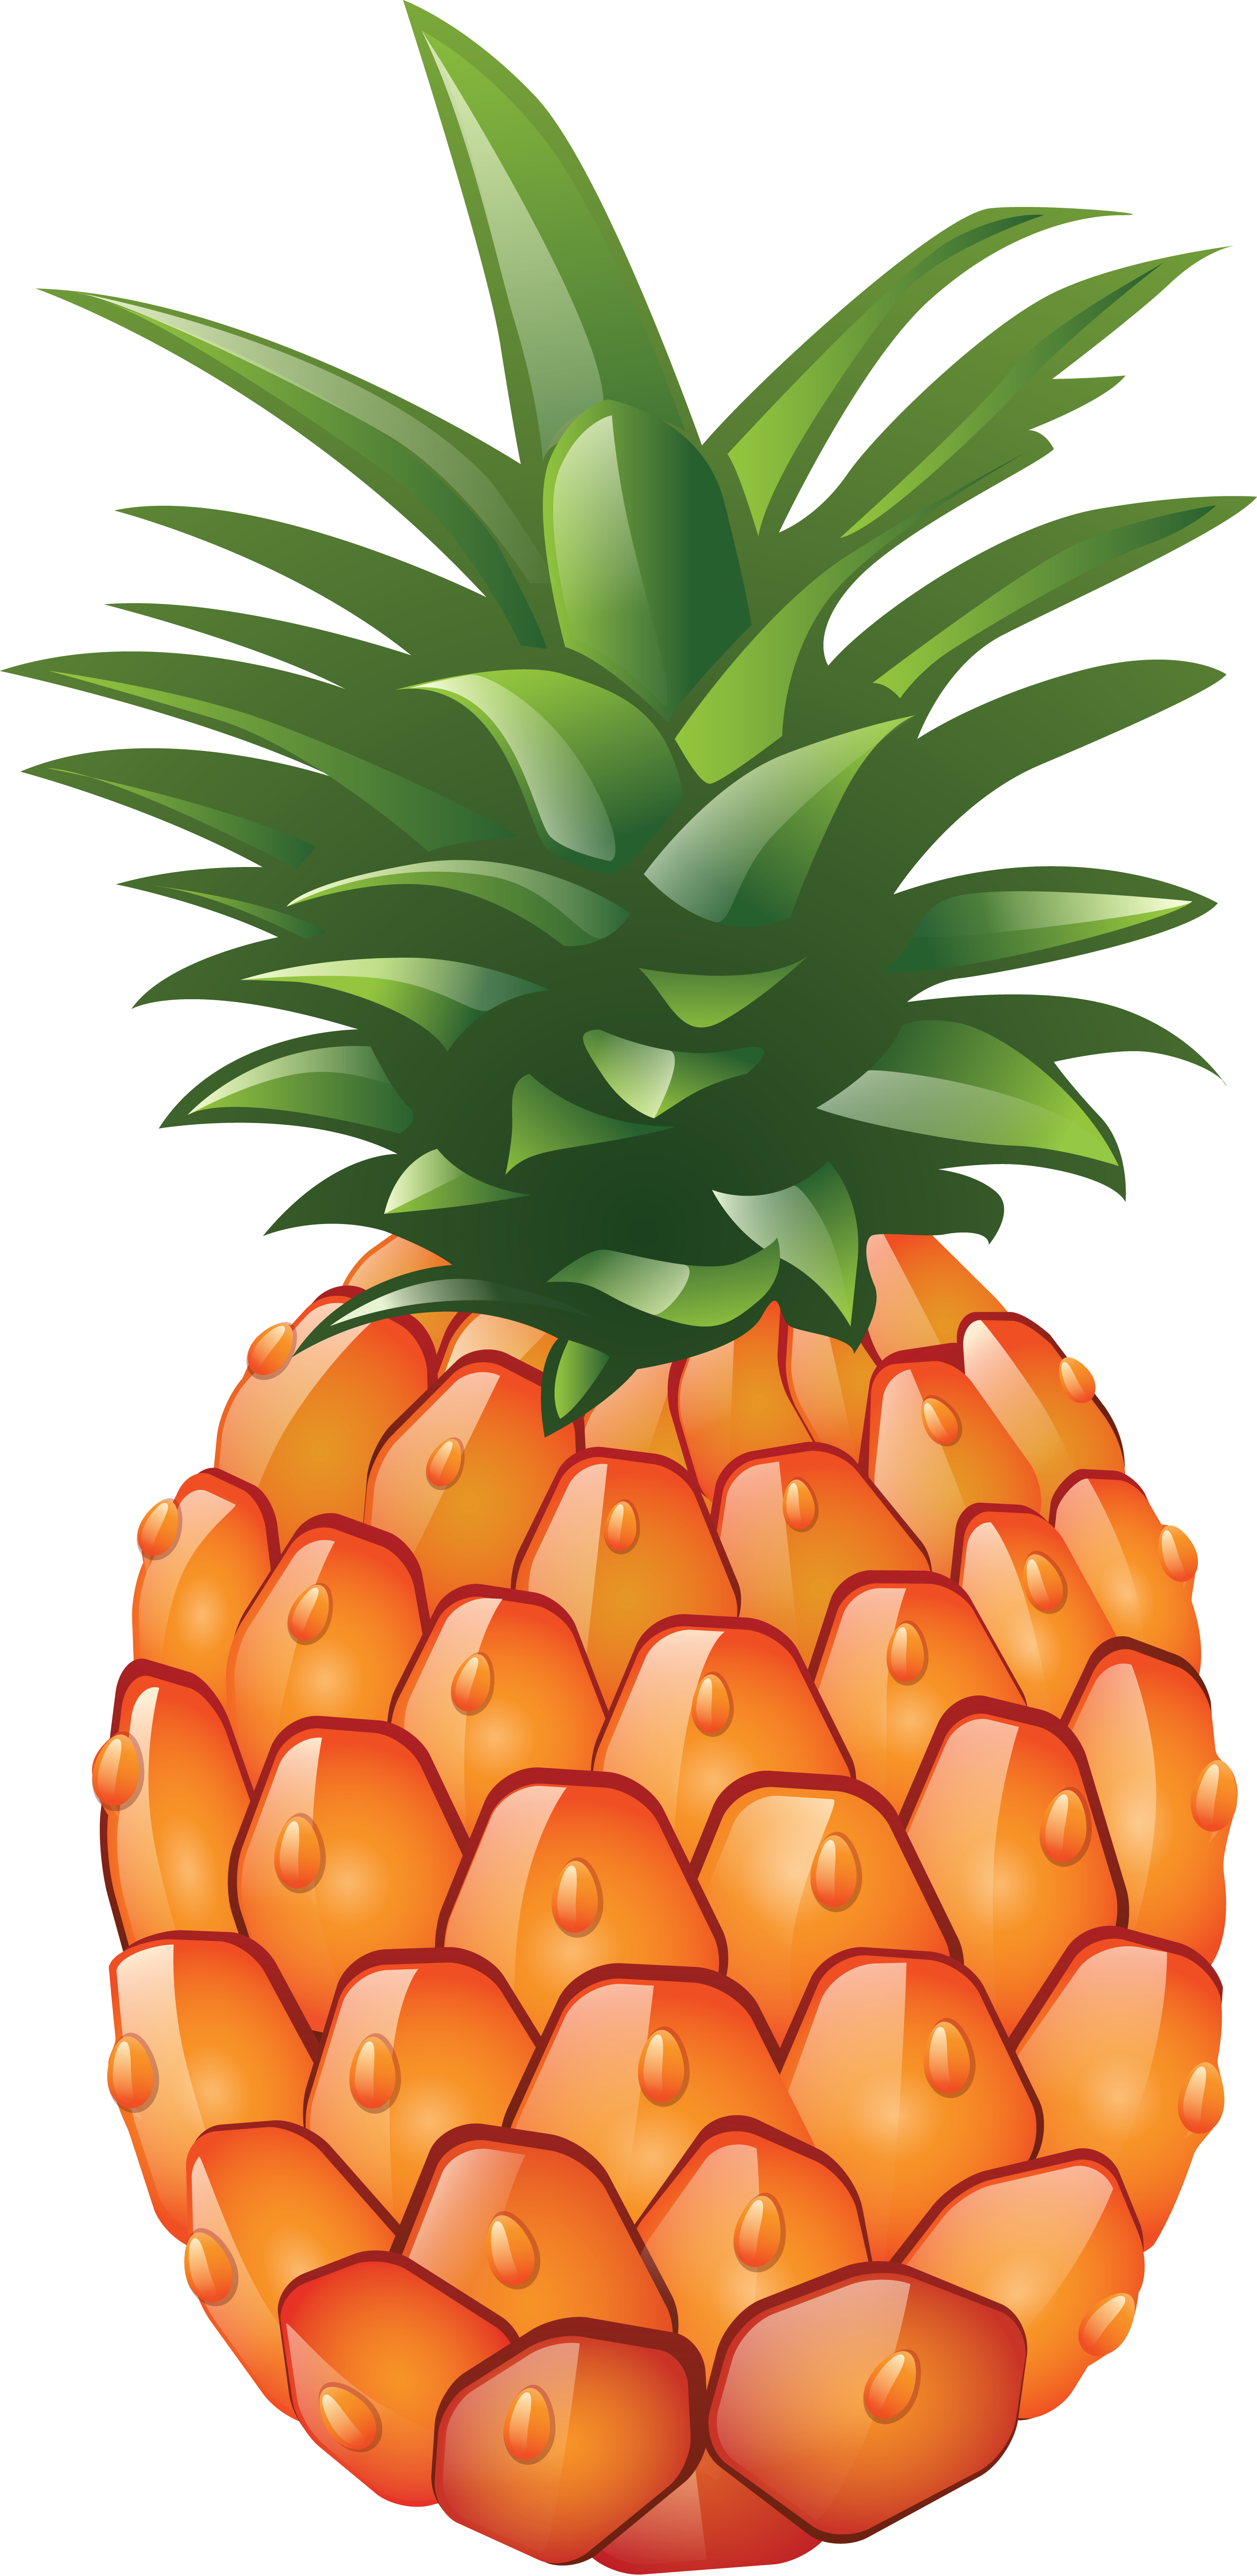 Png image free download. Clipart food pineapple